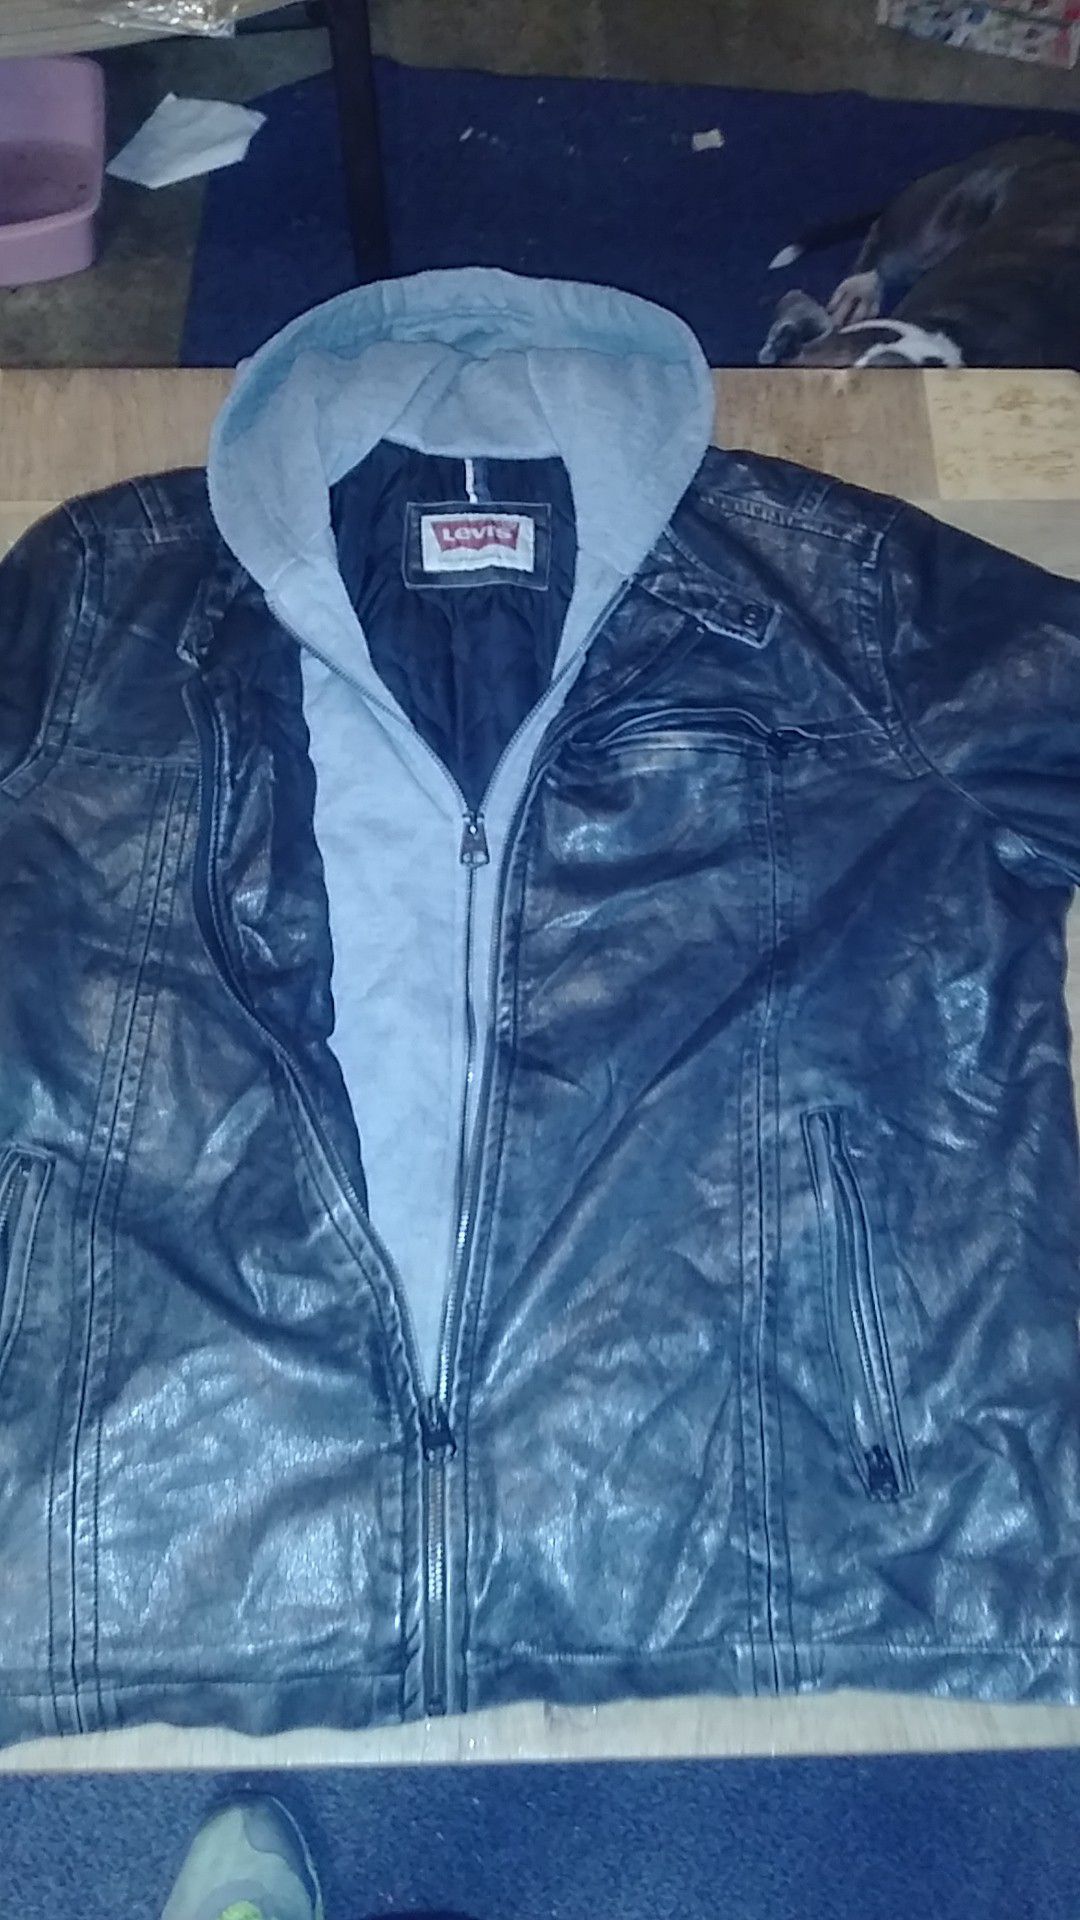 Levis leather jacket with hoodie $20. OBOsize LARGE